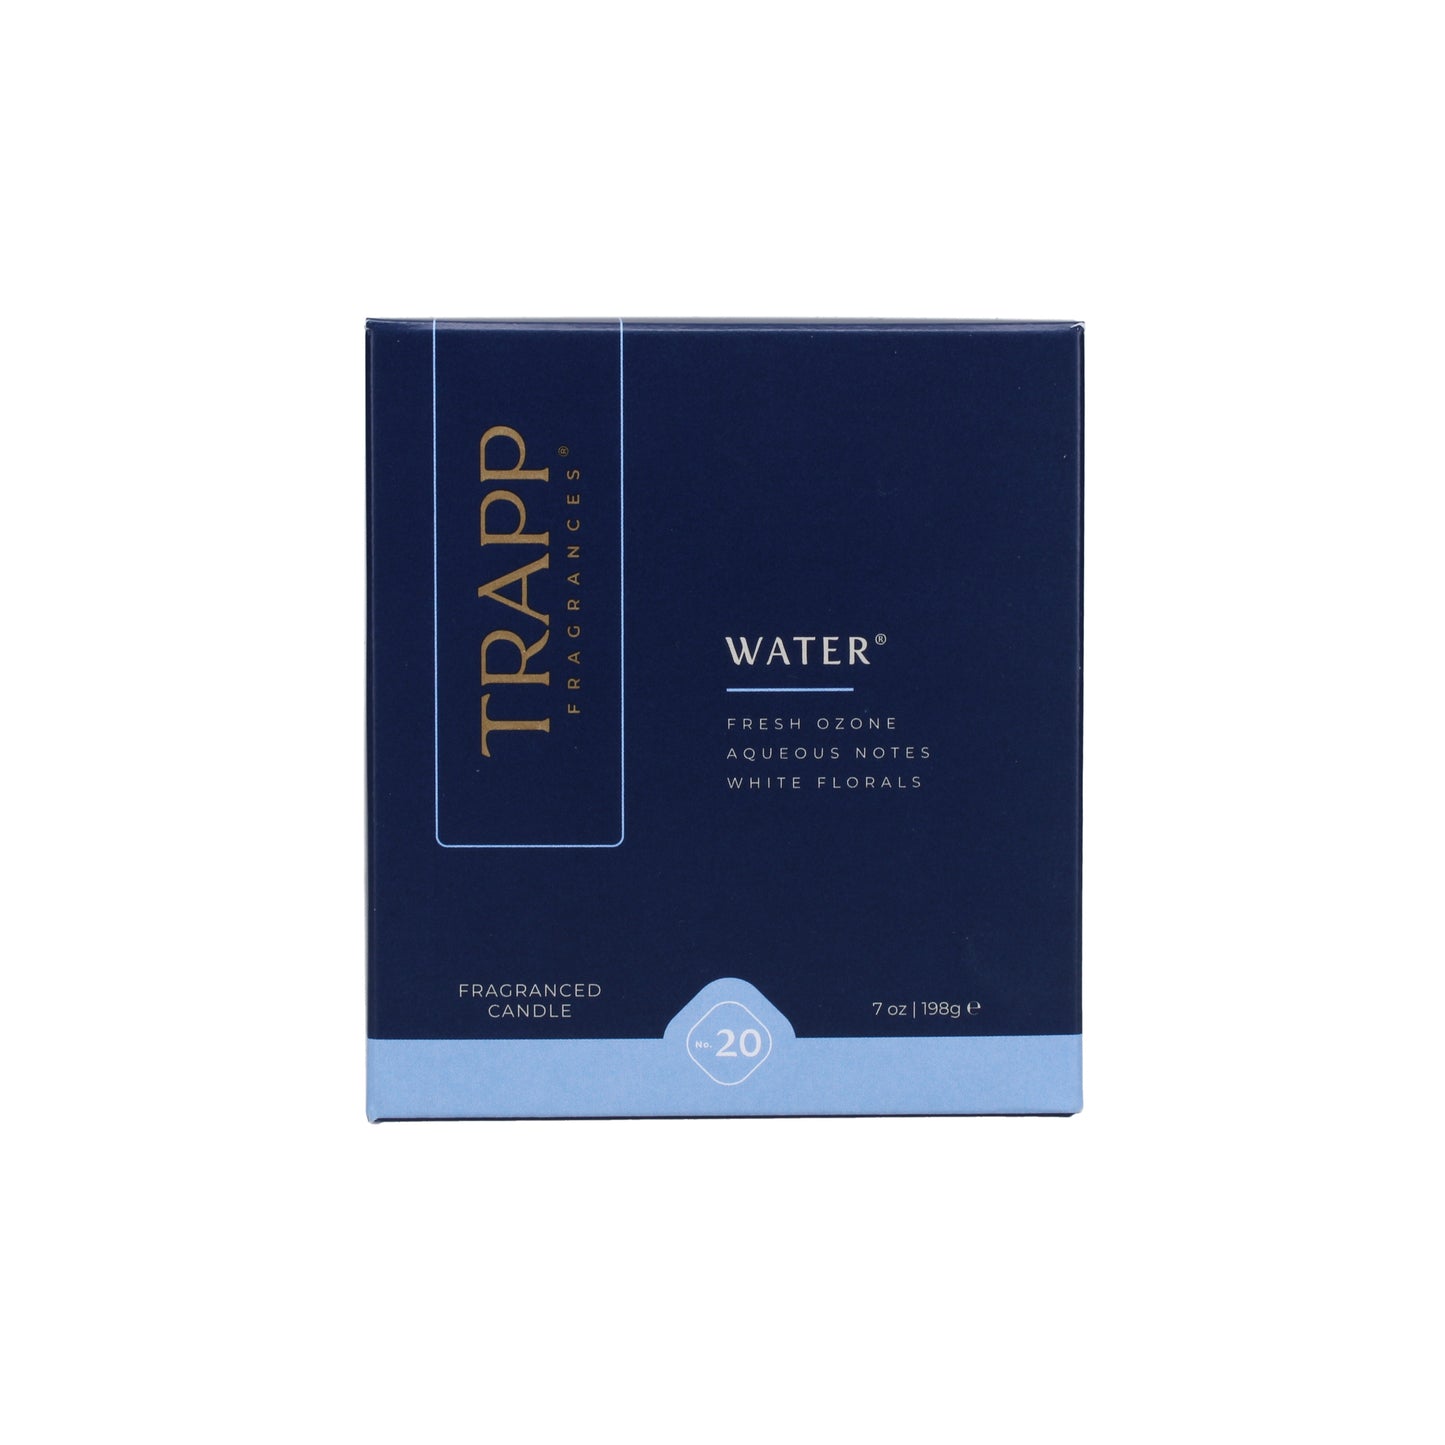 No. 20 Water 7 oz. Candle in Signature Box Image 3